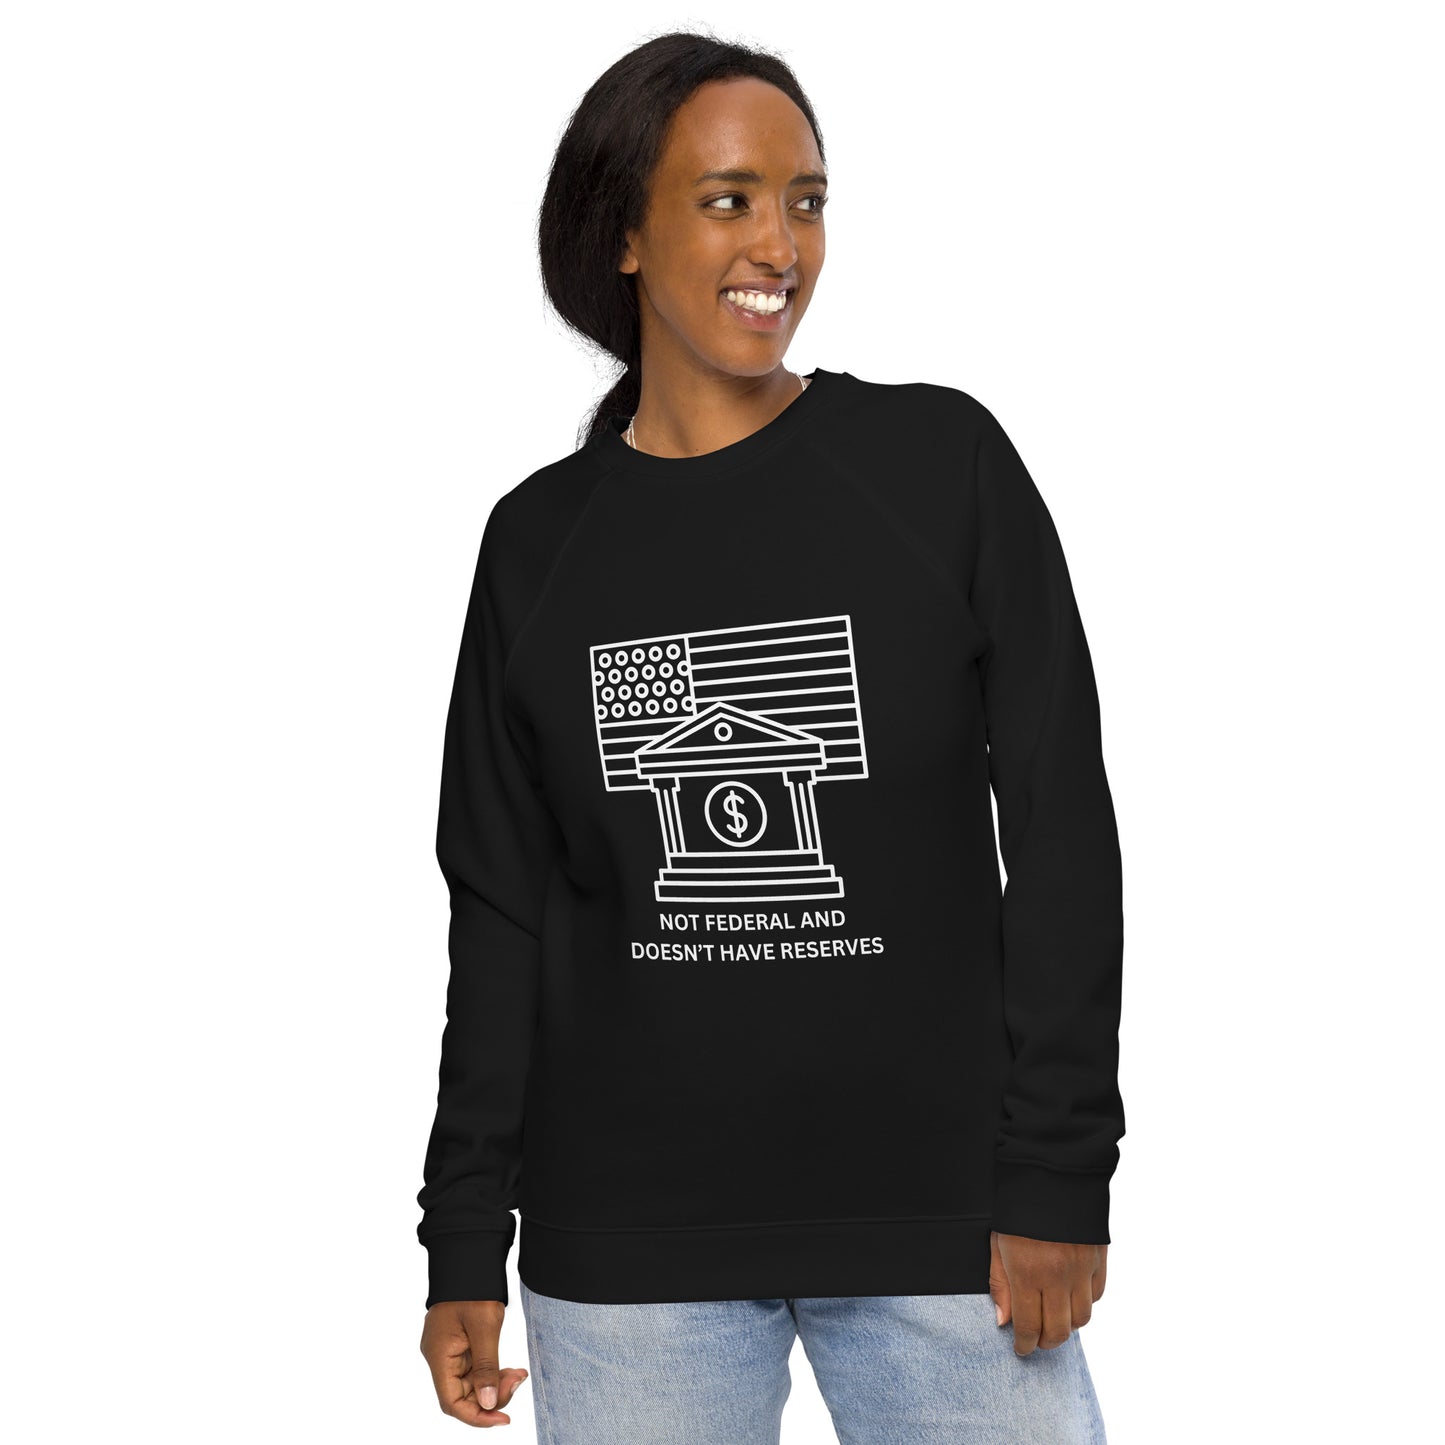 Not federal and doesn't have reserves Unisex organic raglan sweatshirt